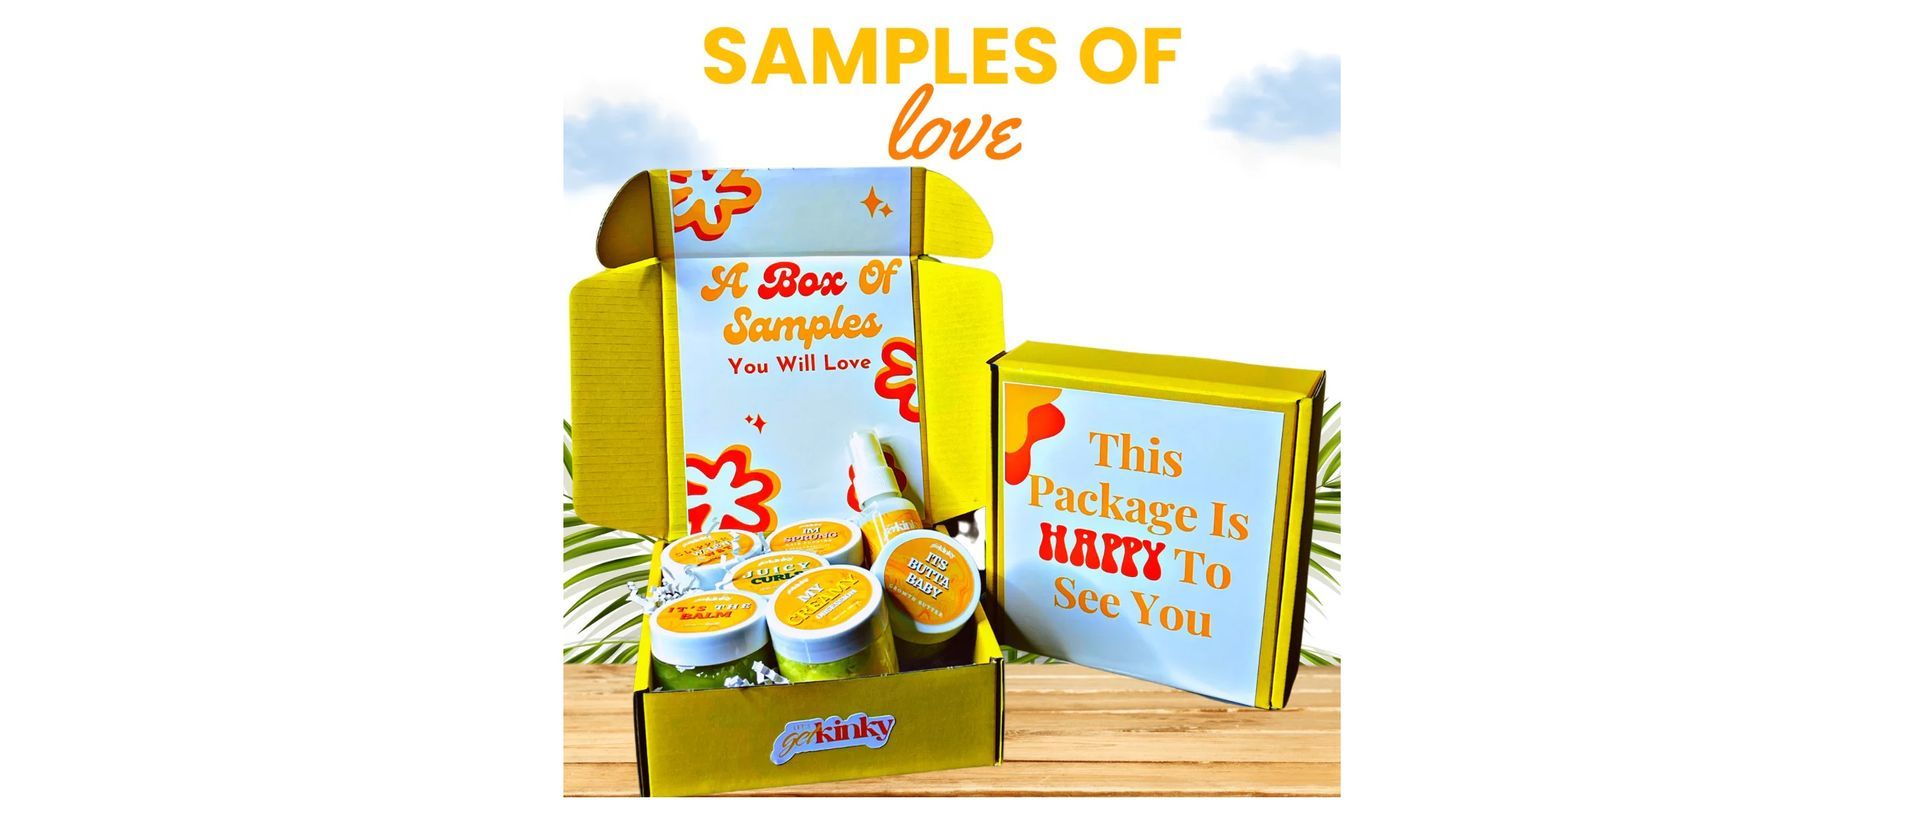 a yellow box with samples of love written on it